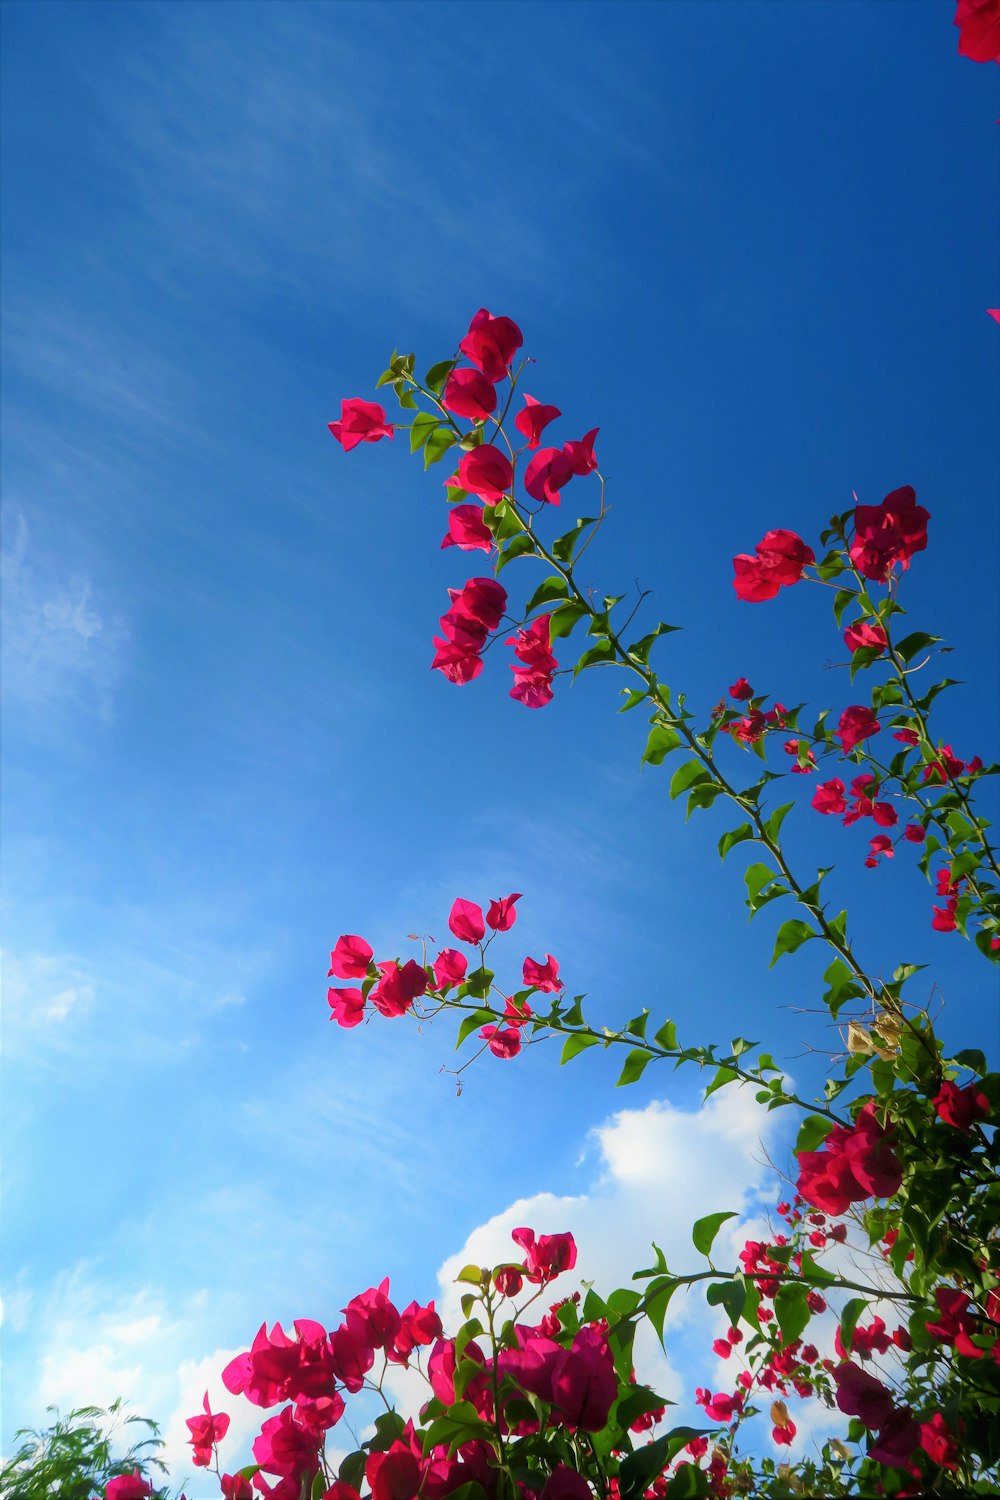 red flowers under blue sky during daytime